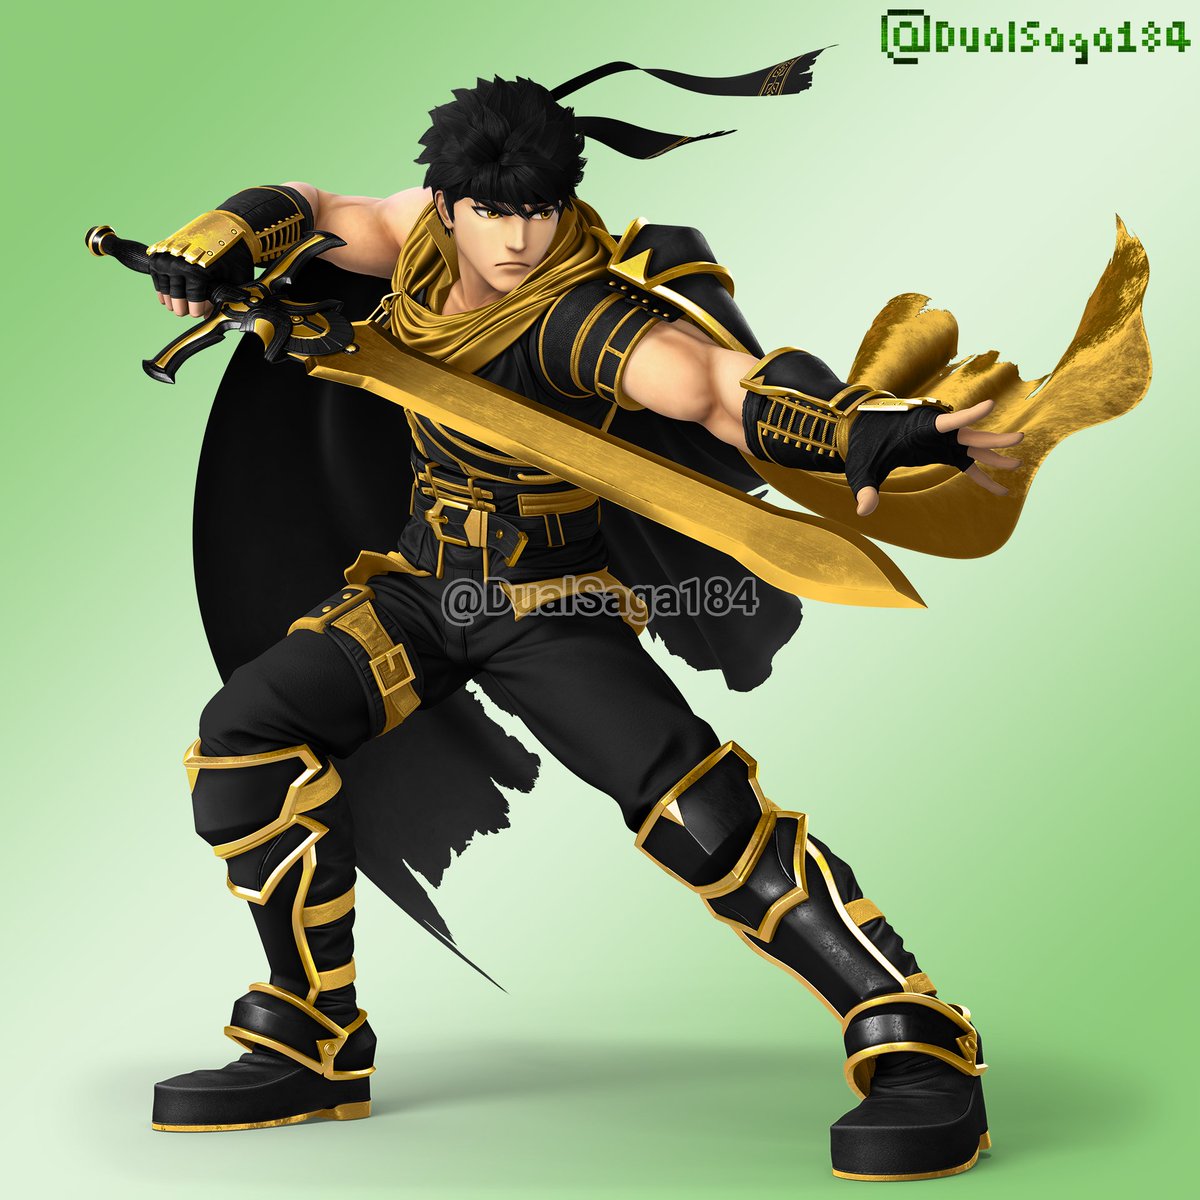 Black and Gold Ike (Path of Radiance and Radiant Dawn) #SaveSmash